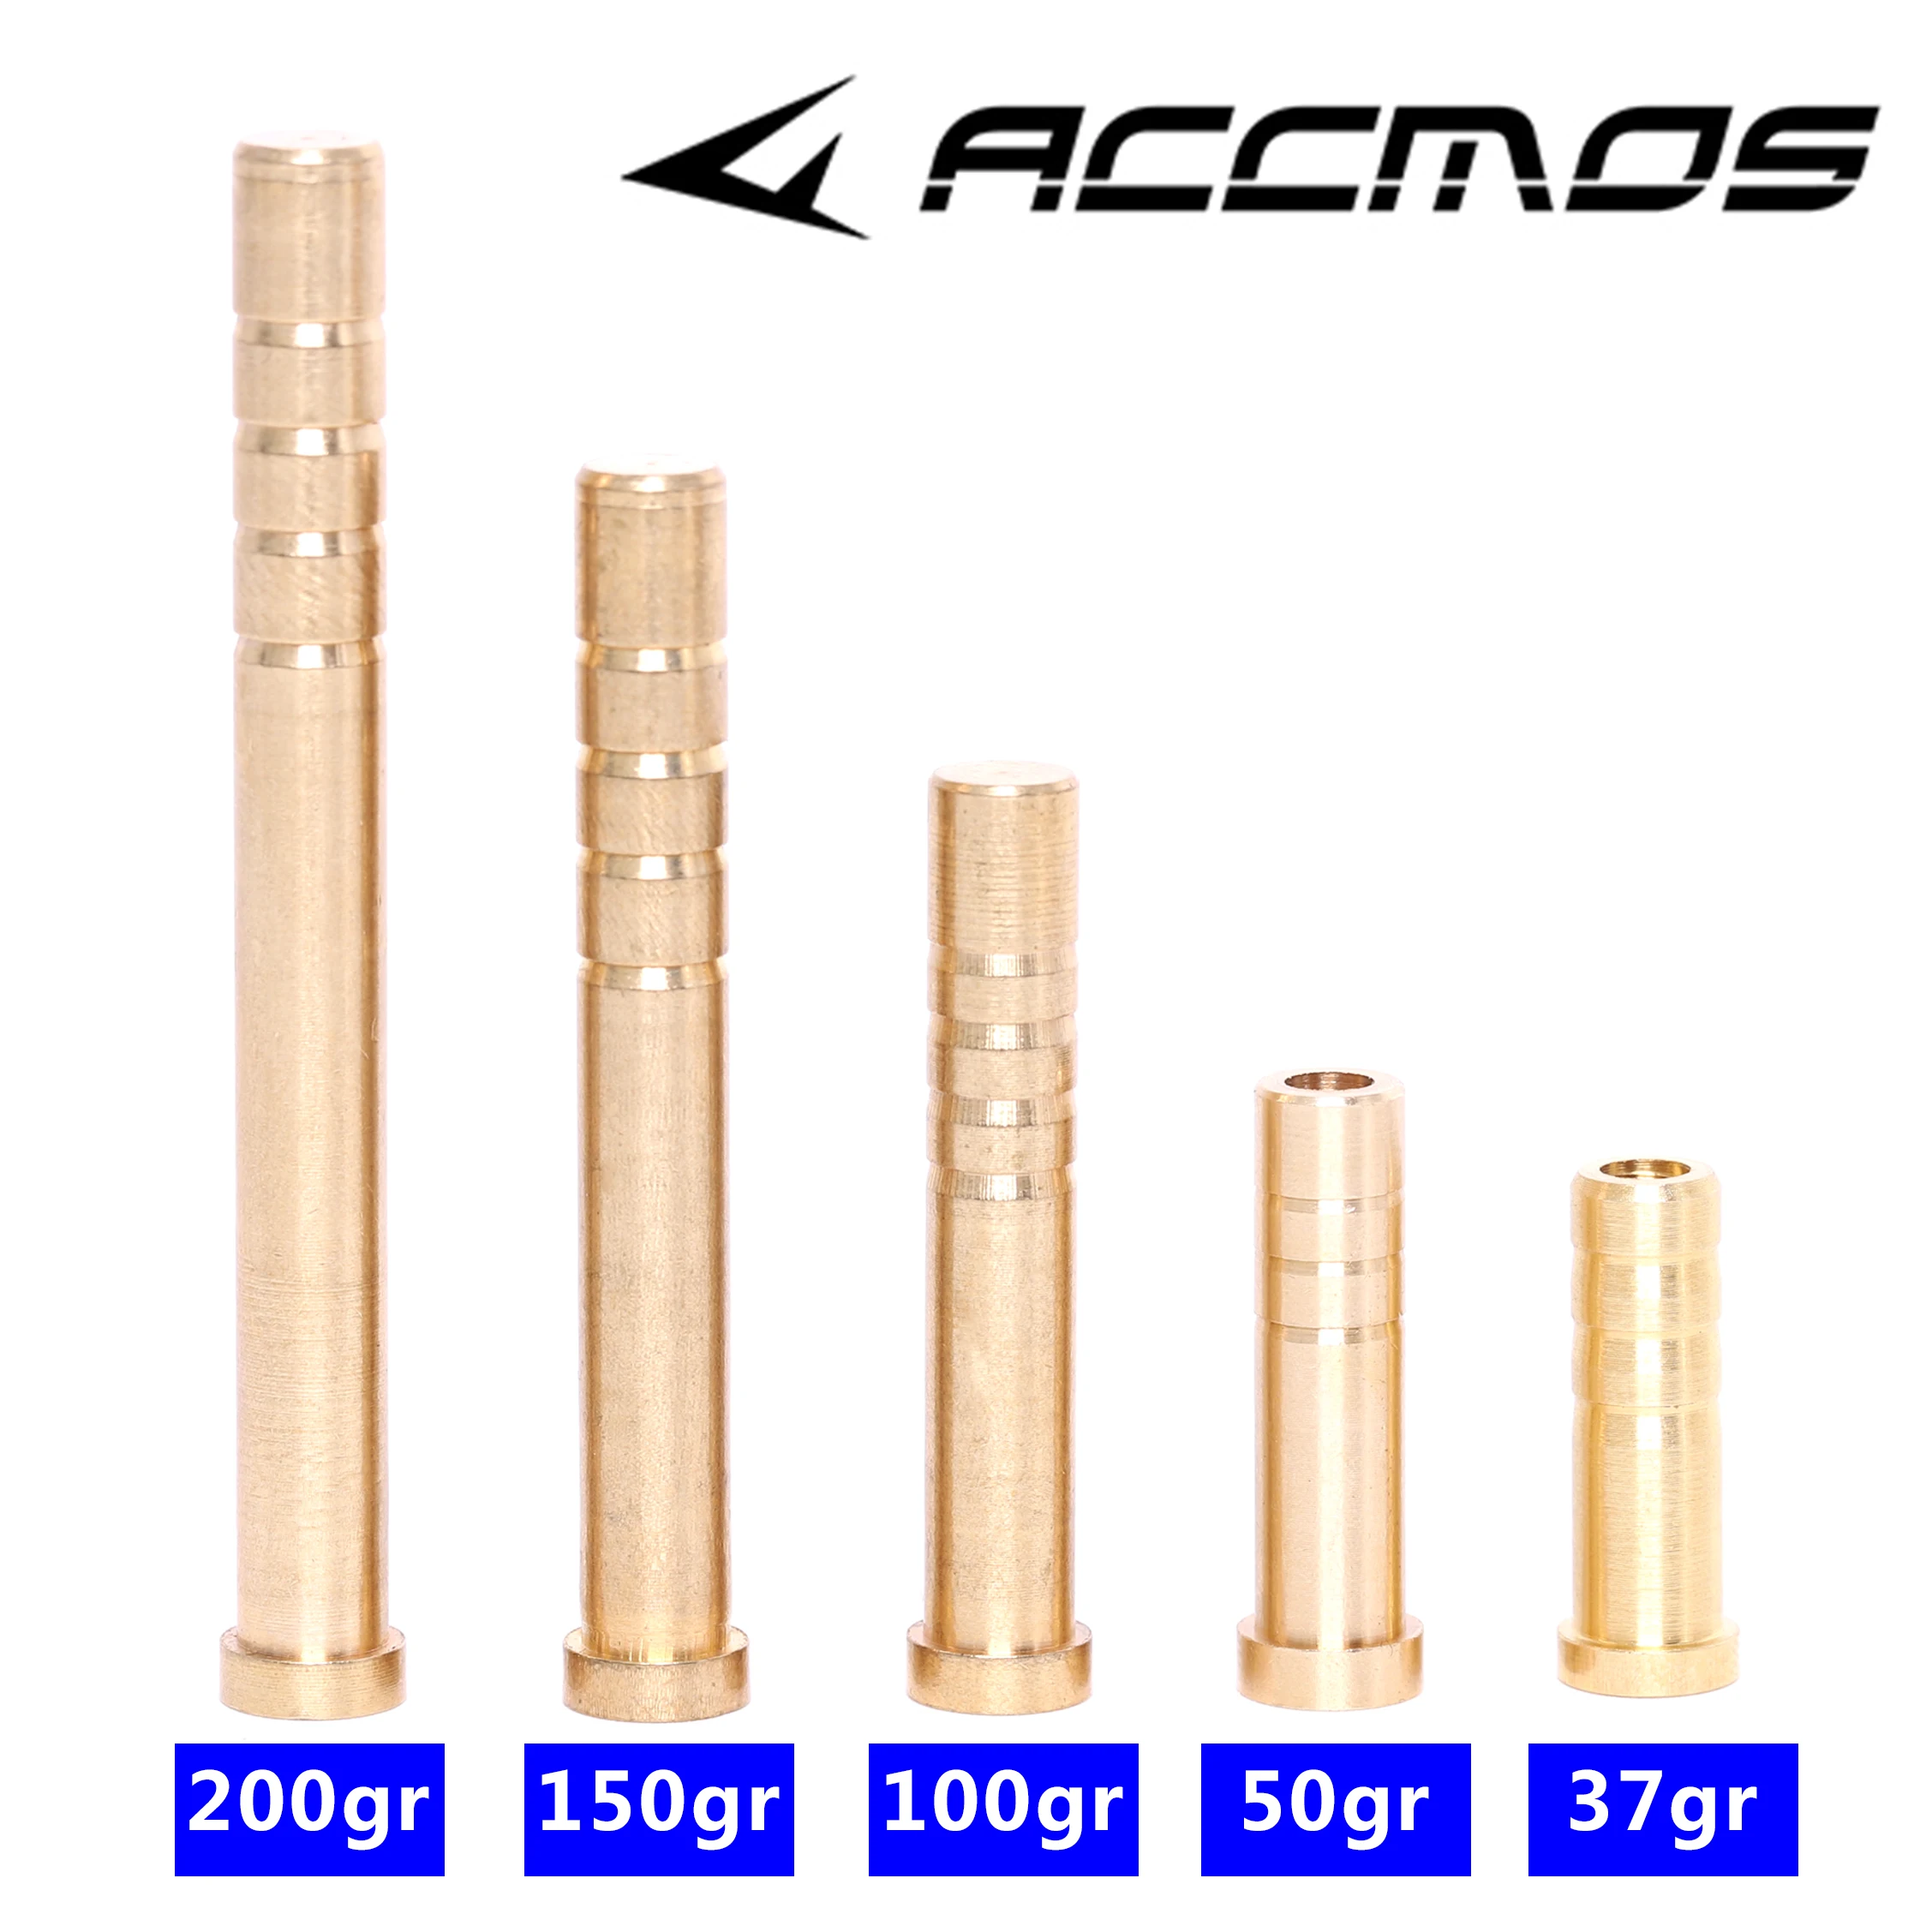 24 Pieces Copper Arrow Inserts for 6.2mm Arrow Shaft Archery Accessories 